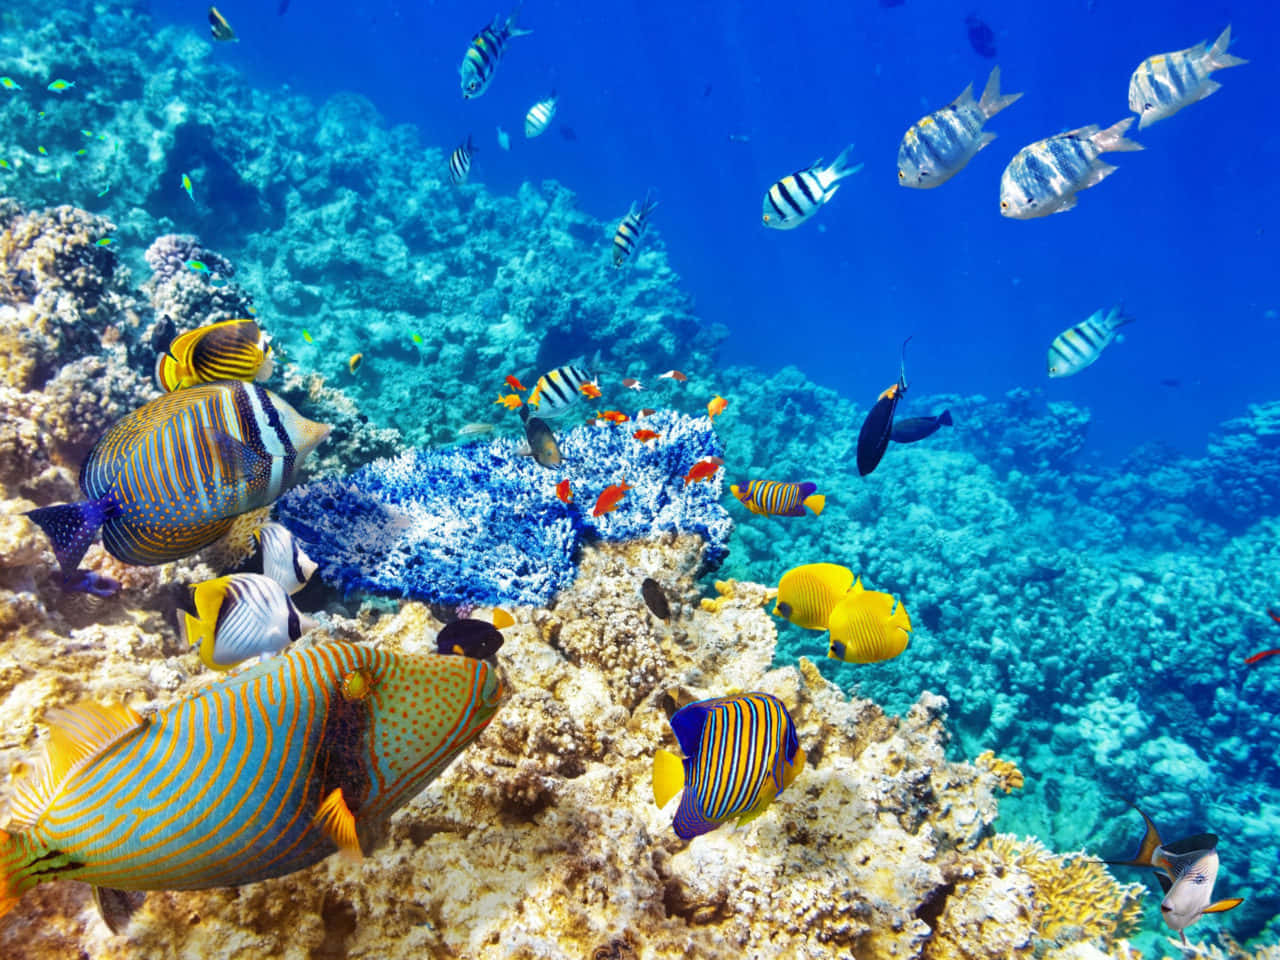 Tropical Fish Swimming in a Colorful Coral Reef